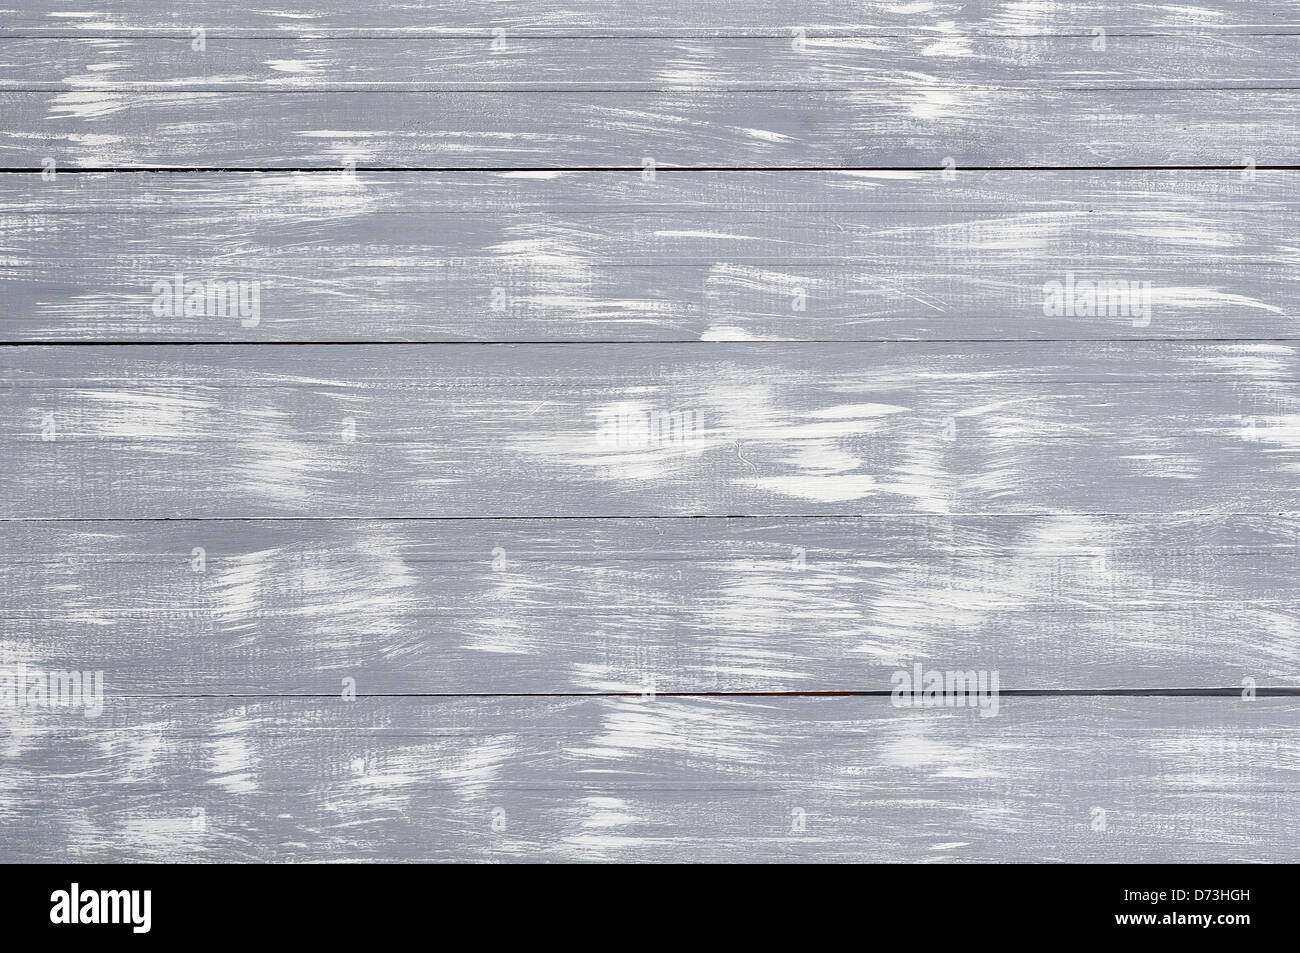 Blue painted wooden background. Wooden texture. Stock Photo